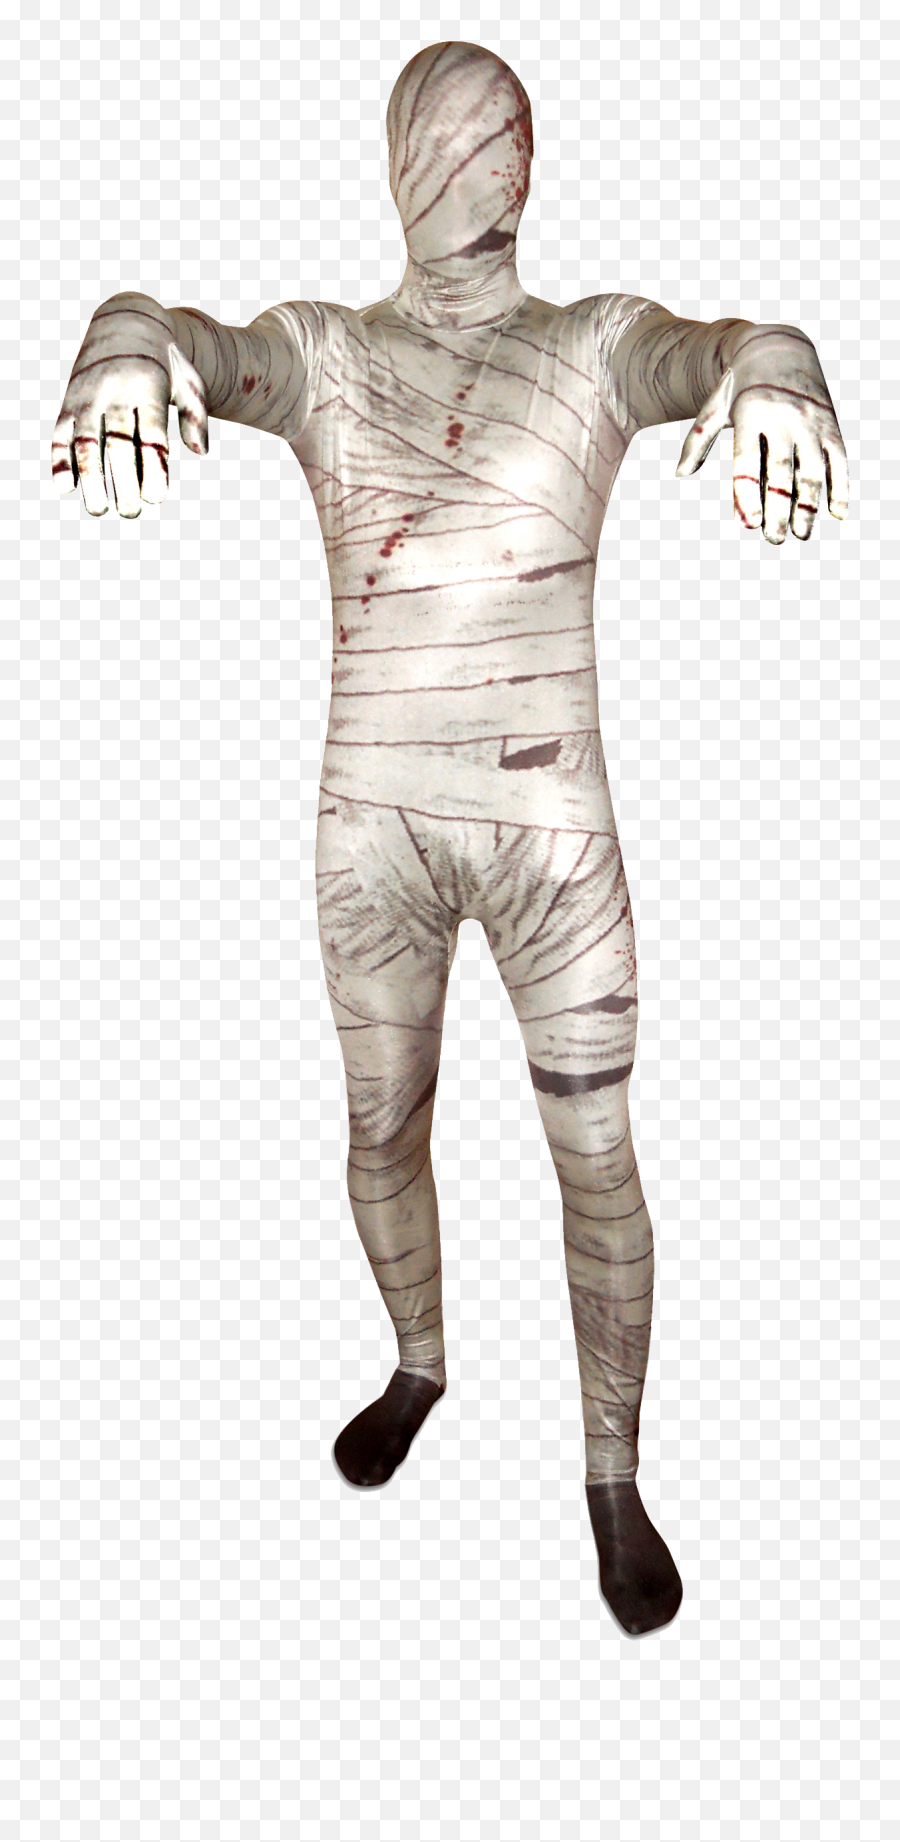 Mummy Png - Halloween Costumes For Men Scary,Mummy Png